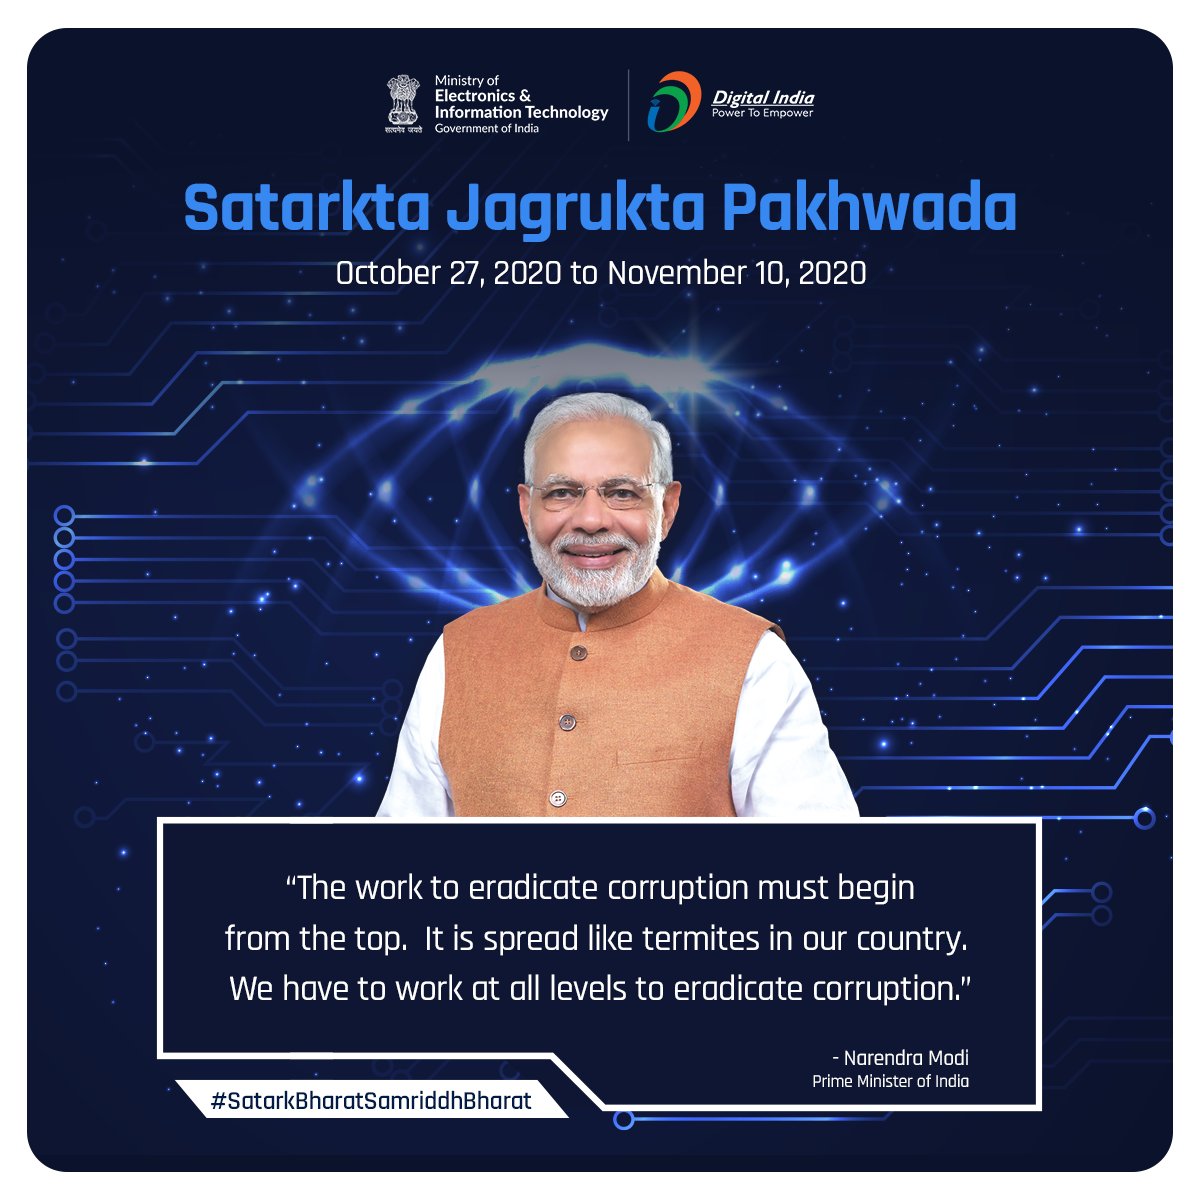 “The work to eradicate corruption must begin from the top.  It is spread like termites in our country.  We have to work at all levels to eradicate corruption.” ~ @narendramodi, Hon'ble Prime Minister. 

#SatarkBharatSamriddhBharat #VigilanceWeek2020 #BeVigilant